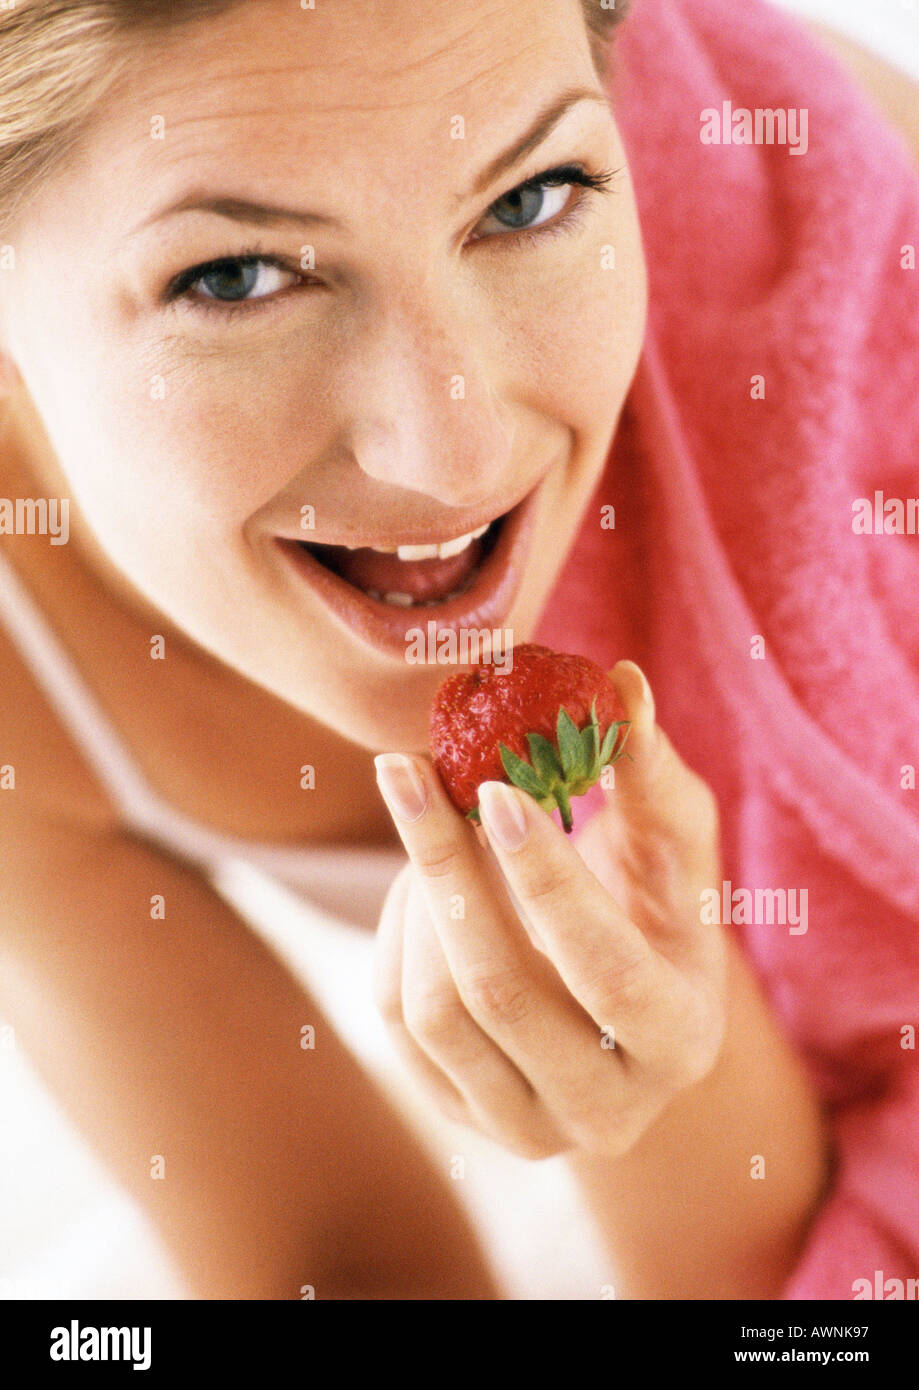 Woman eating strawberry, low angle view, close-up Stock Photo